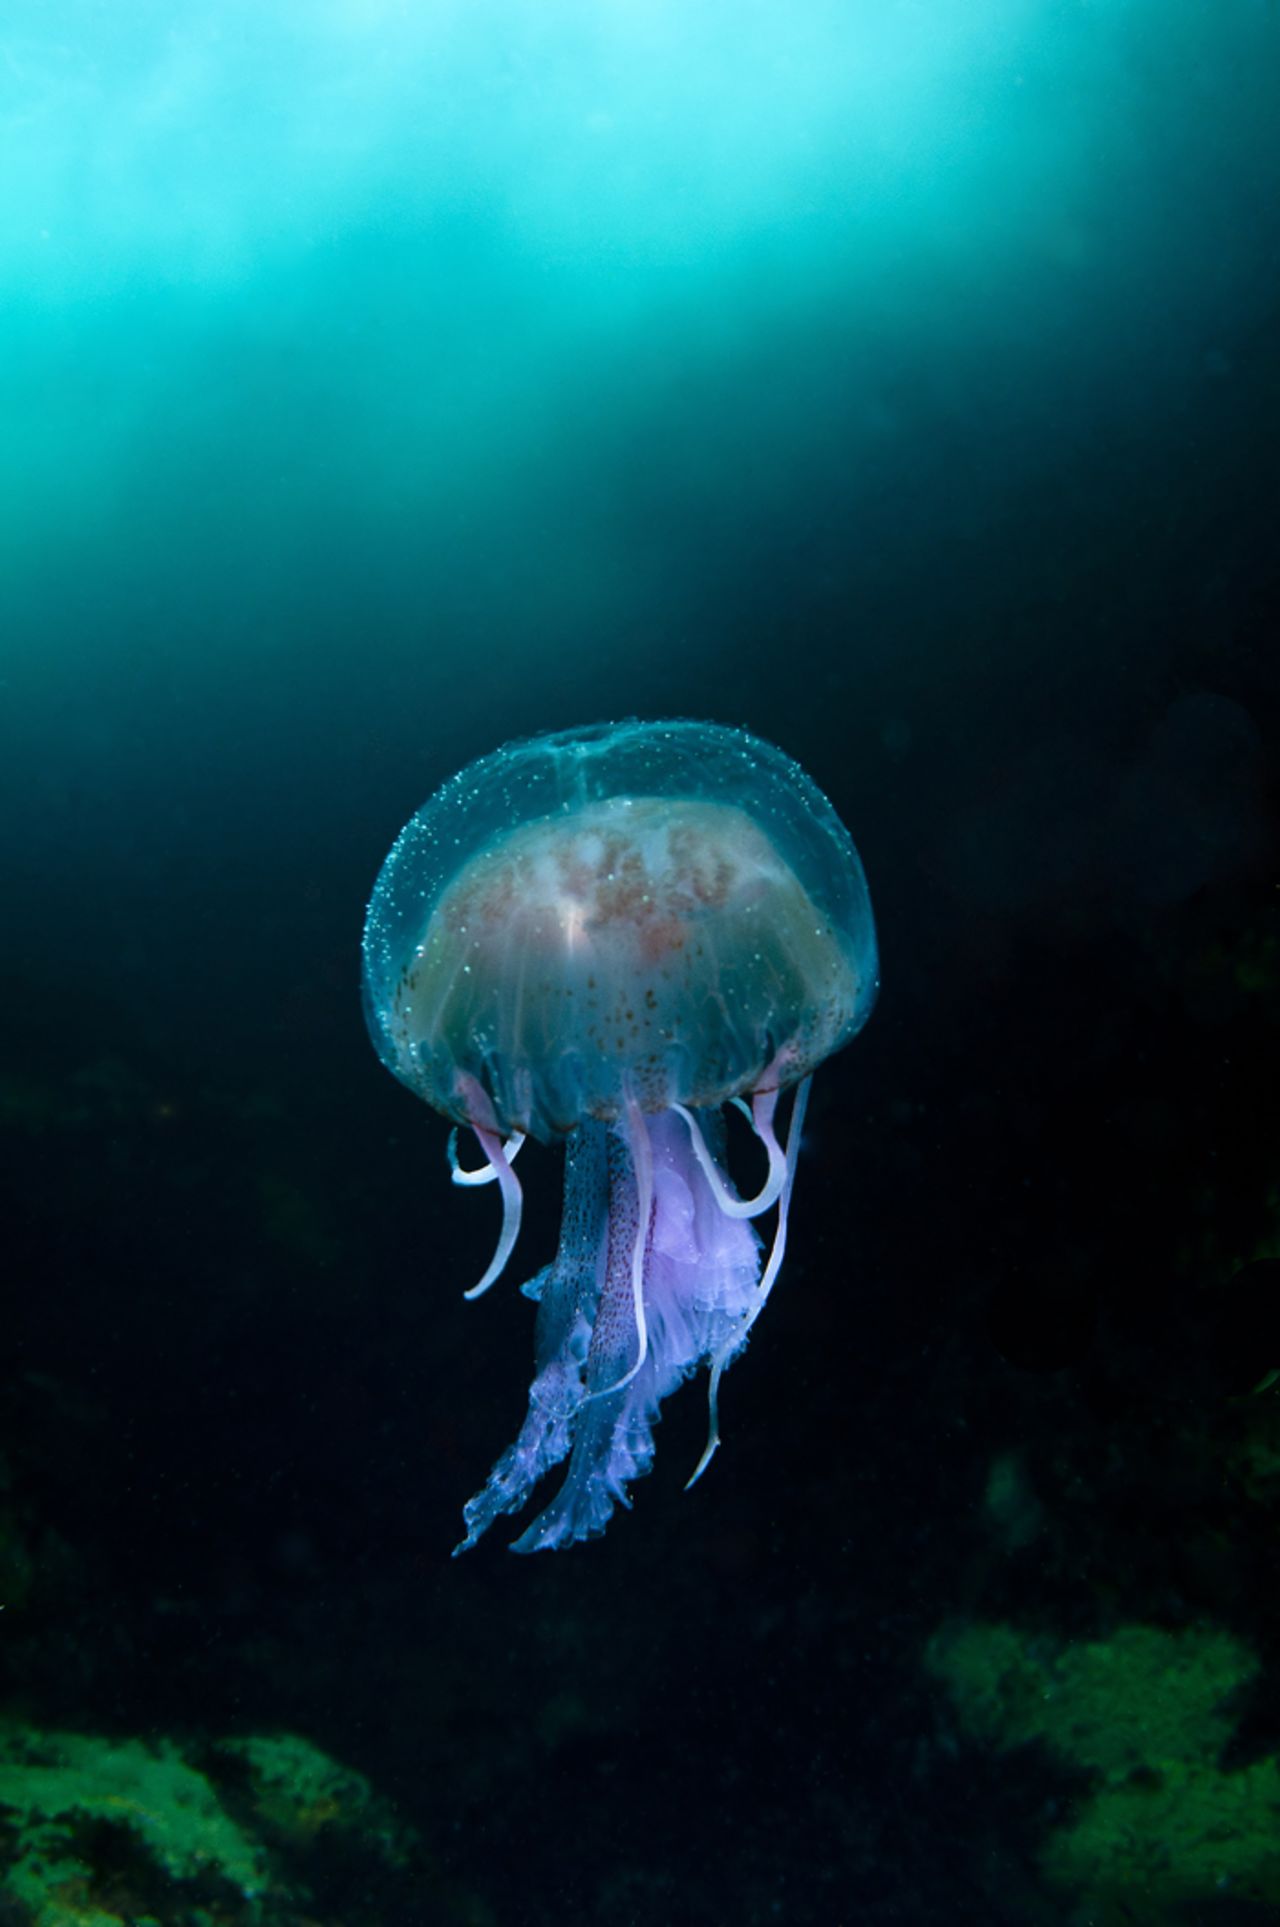 COAST AND MARINE/OVERALL WINNER: "Jellyfish in the Blue Sea of Sula Sgeir" by Richard Shucksmith